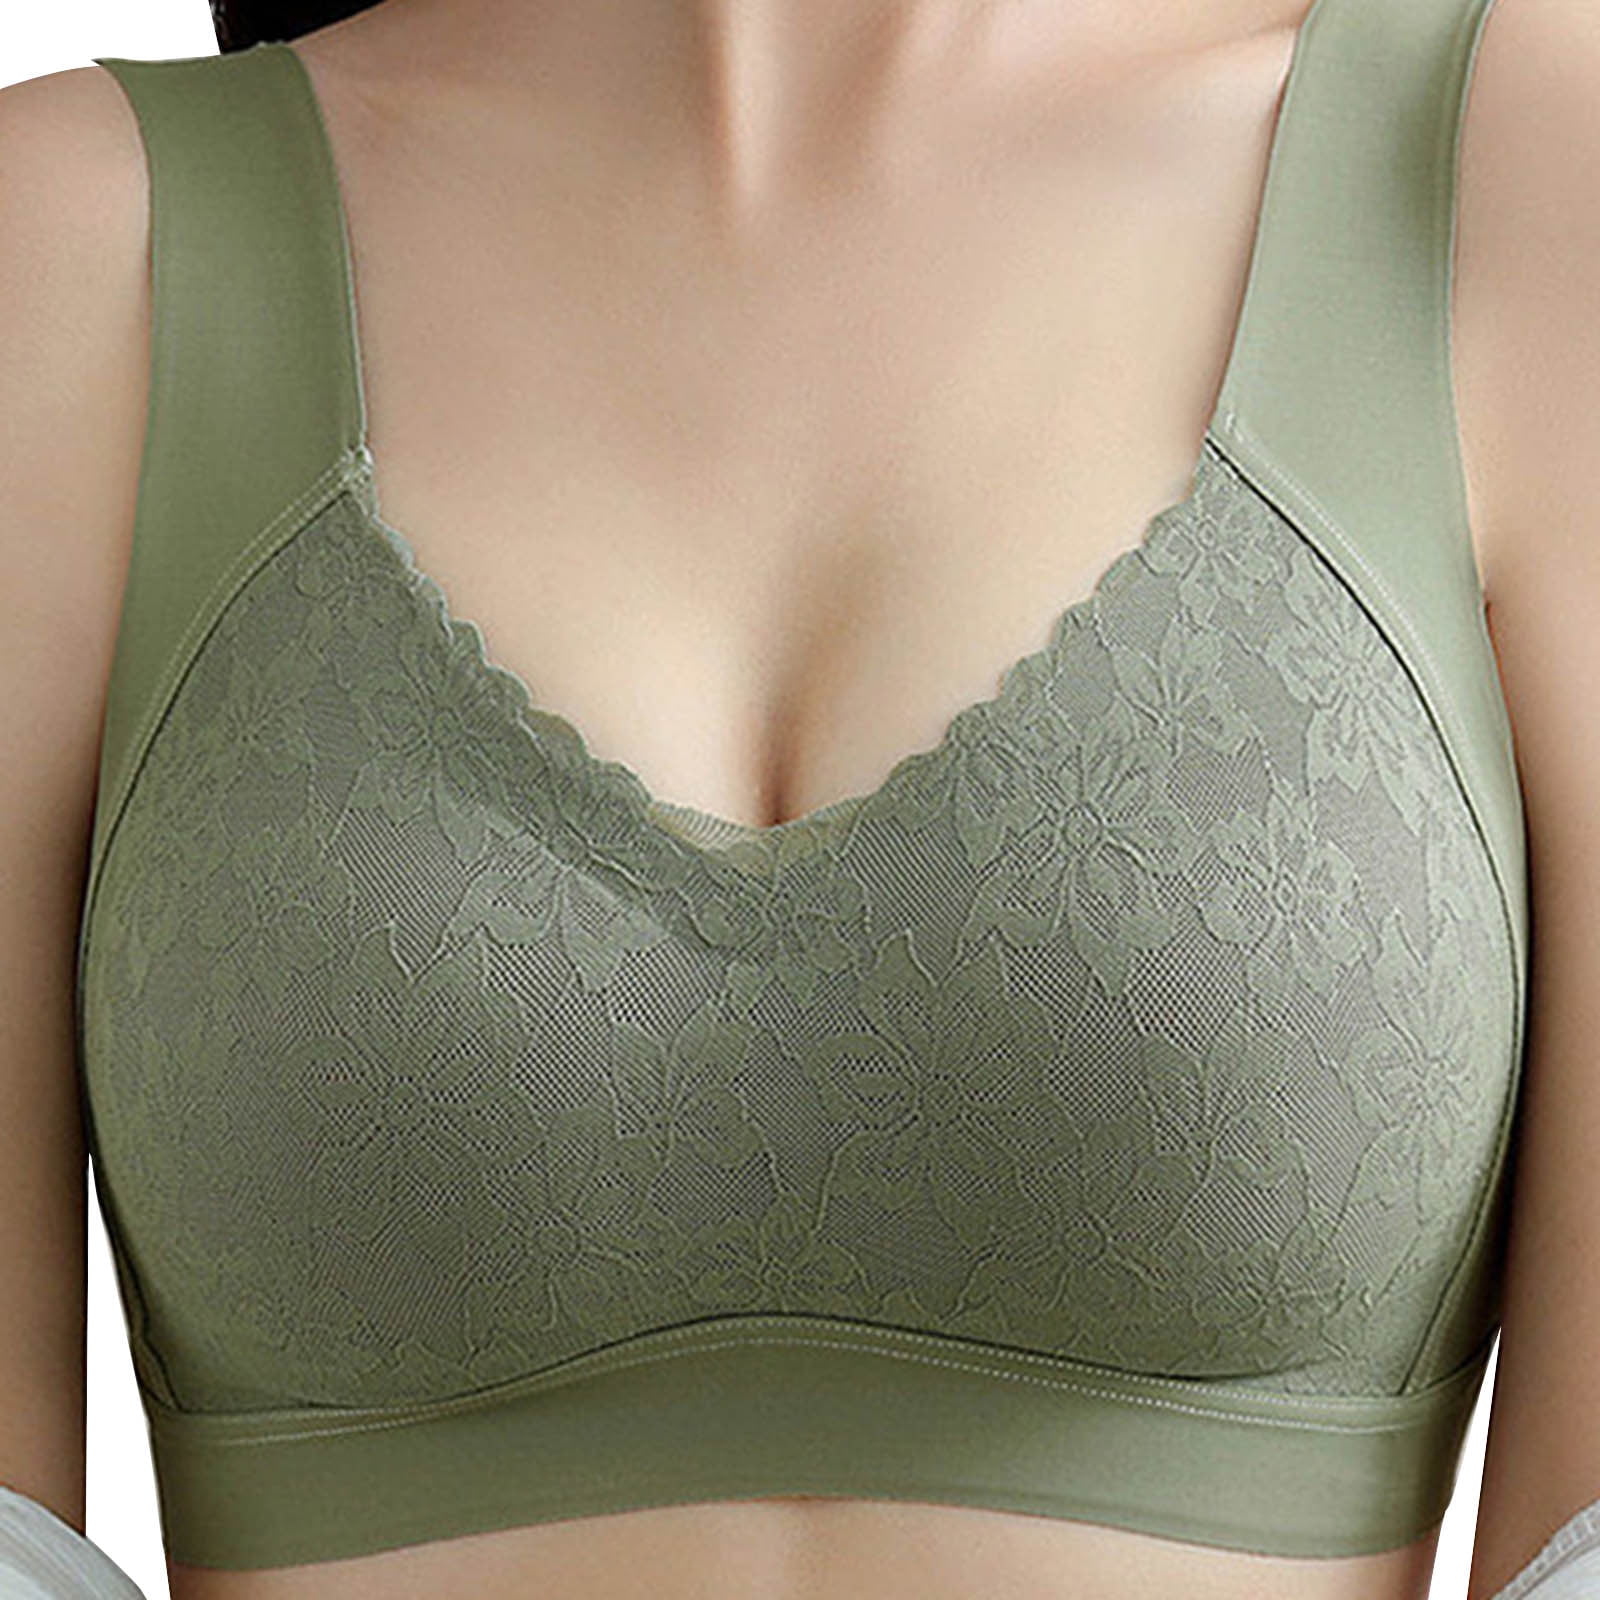 CAICJ98 Women'S Lingerie Beautiful Back Breathable Thin Bras For Women  Seamless Lace Sports Bra For Women Green,XL 